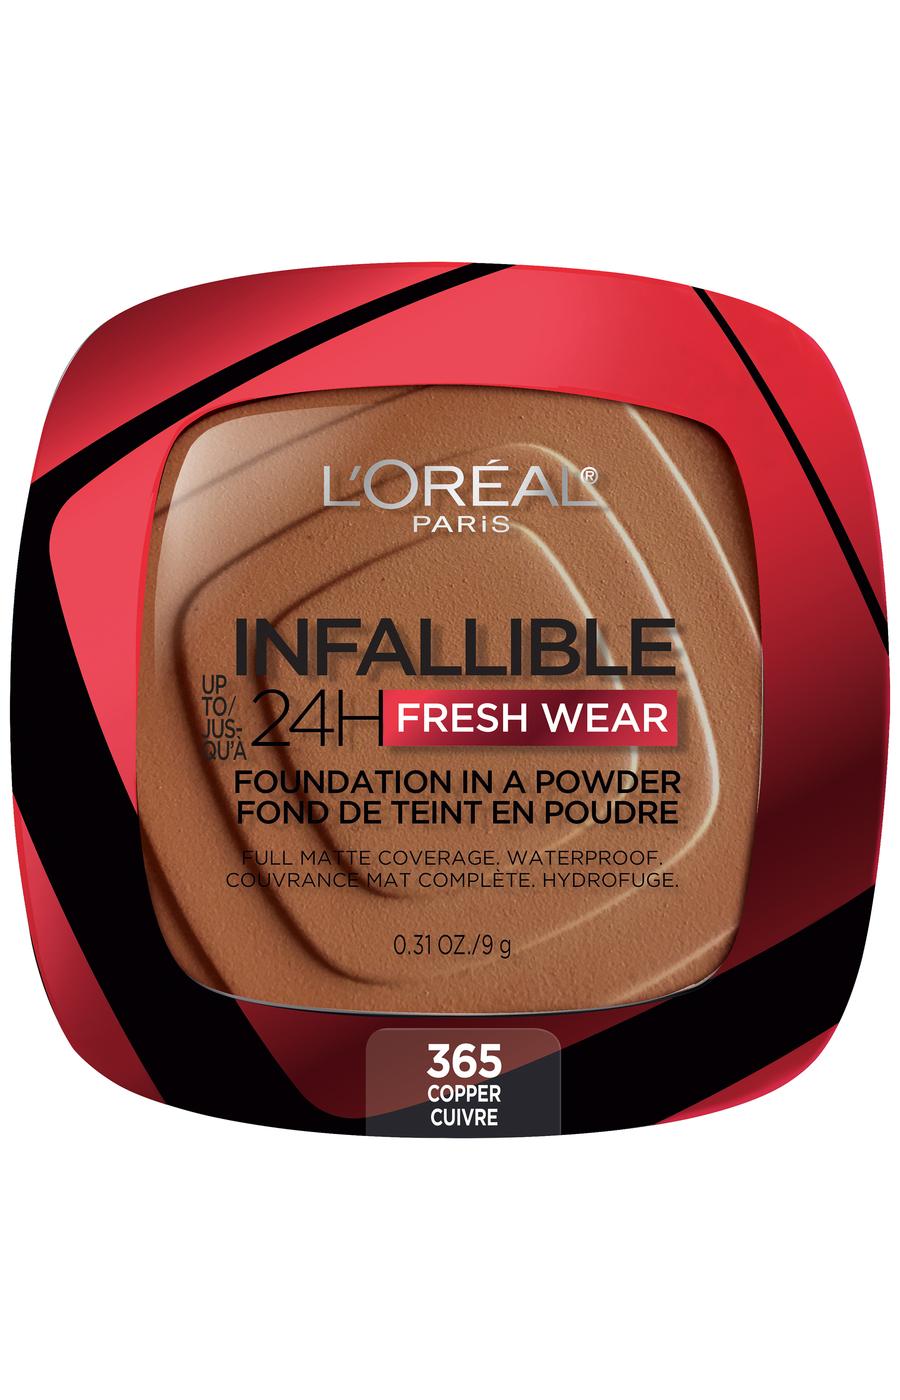 L'Oréal Paris Infallible Up to 24H Fresh Wear Foundation in a Powder Copper; image 1 of 4